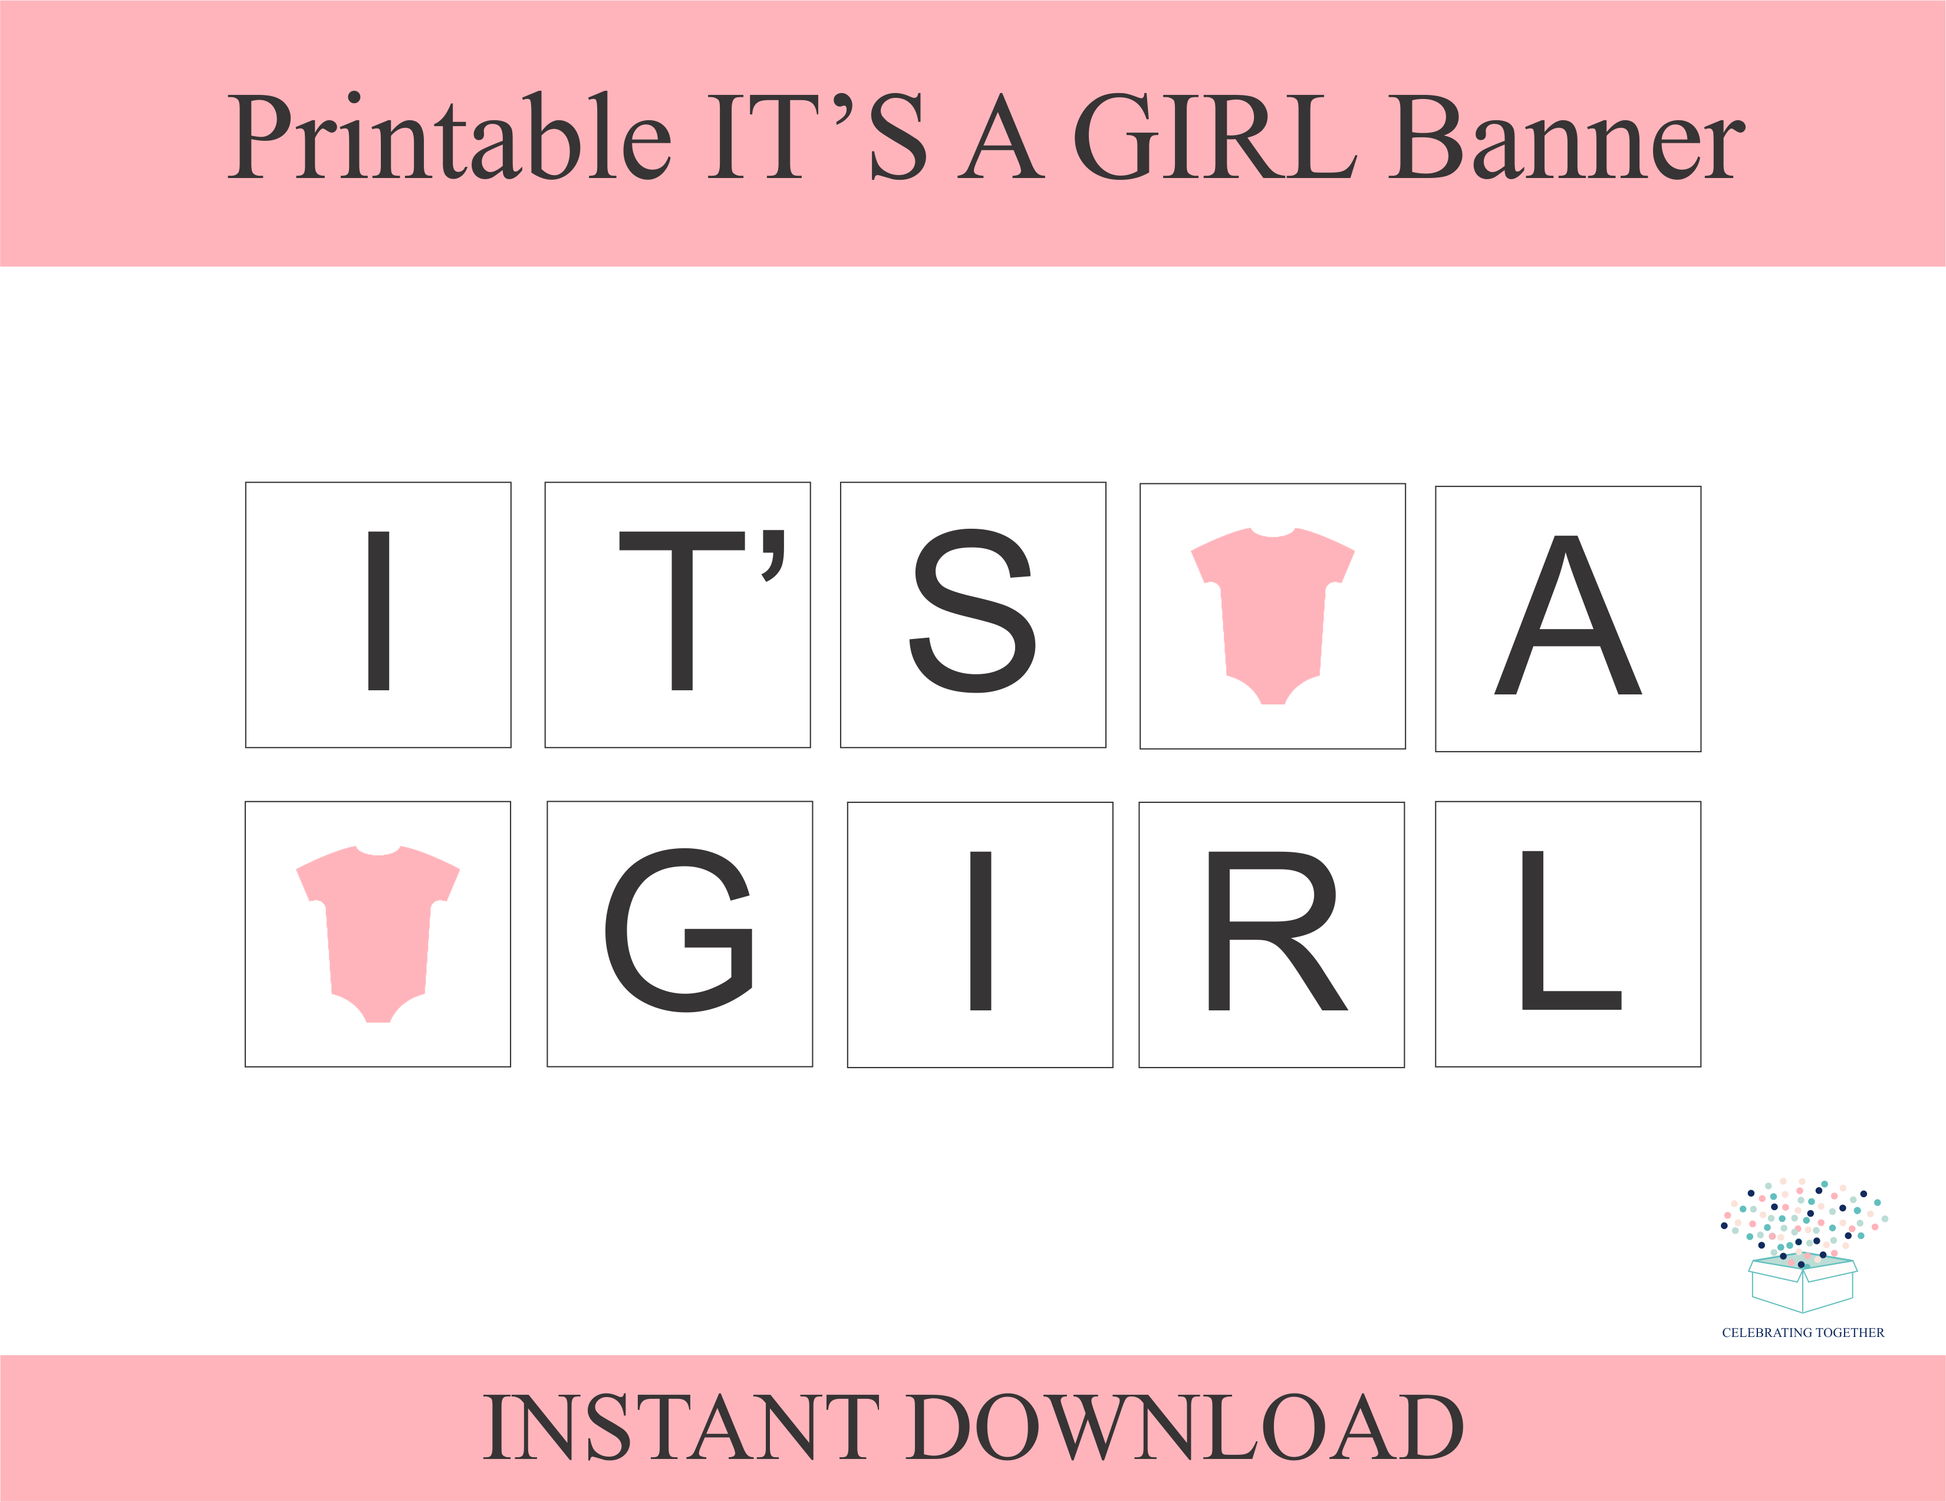 printable onesie it's a girl banner - Celebrating Together